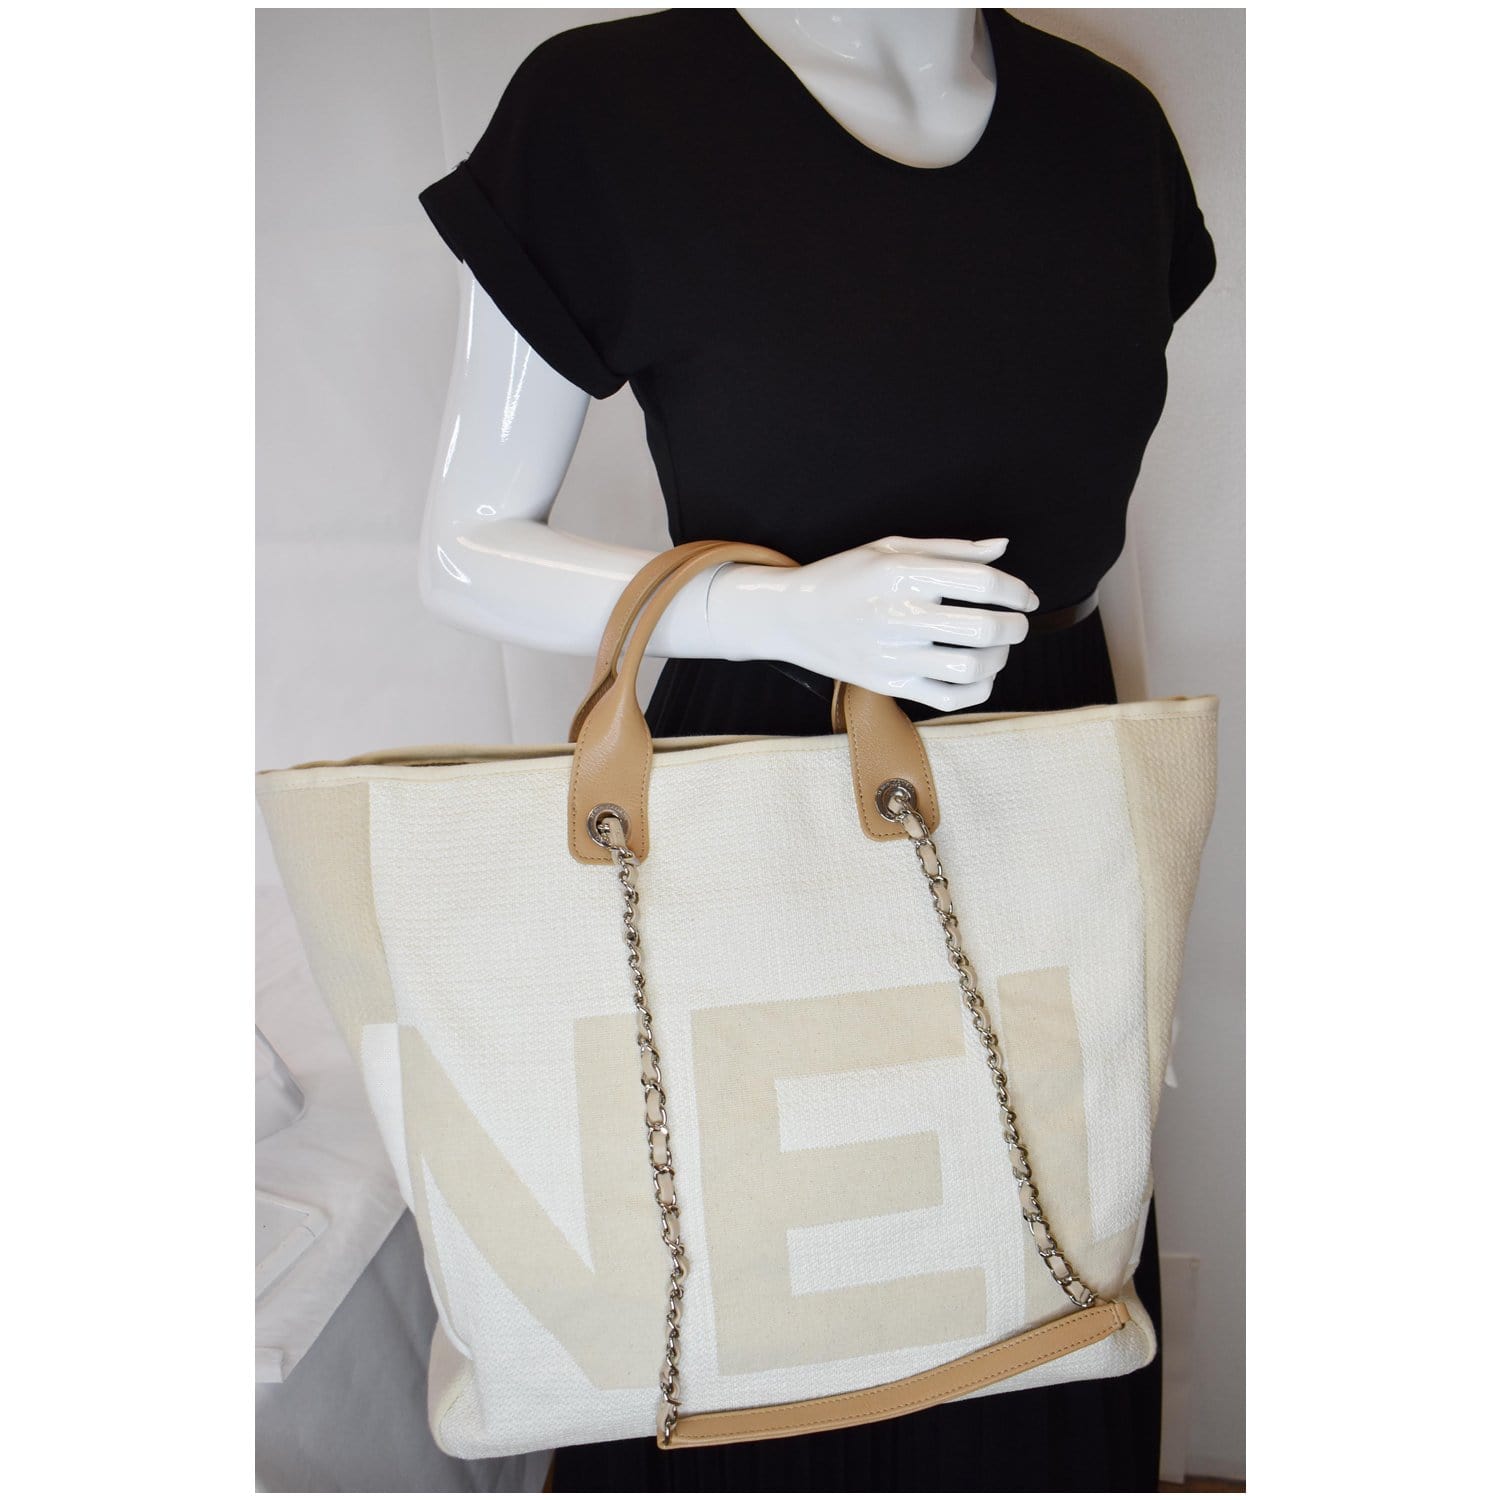 Chanel 22S Deauville Beige Large Shopping 30cm 2Way Silver Chain Handle  Tote Bag